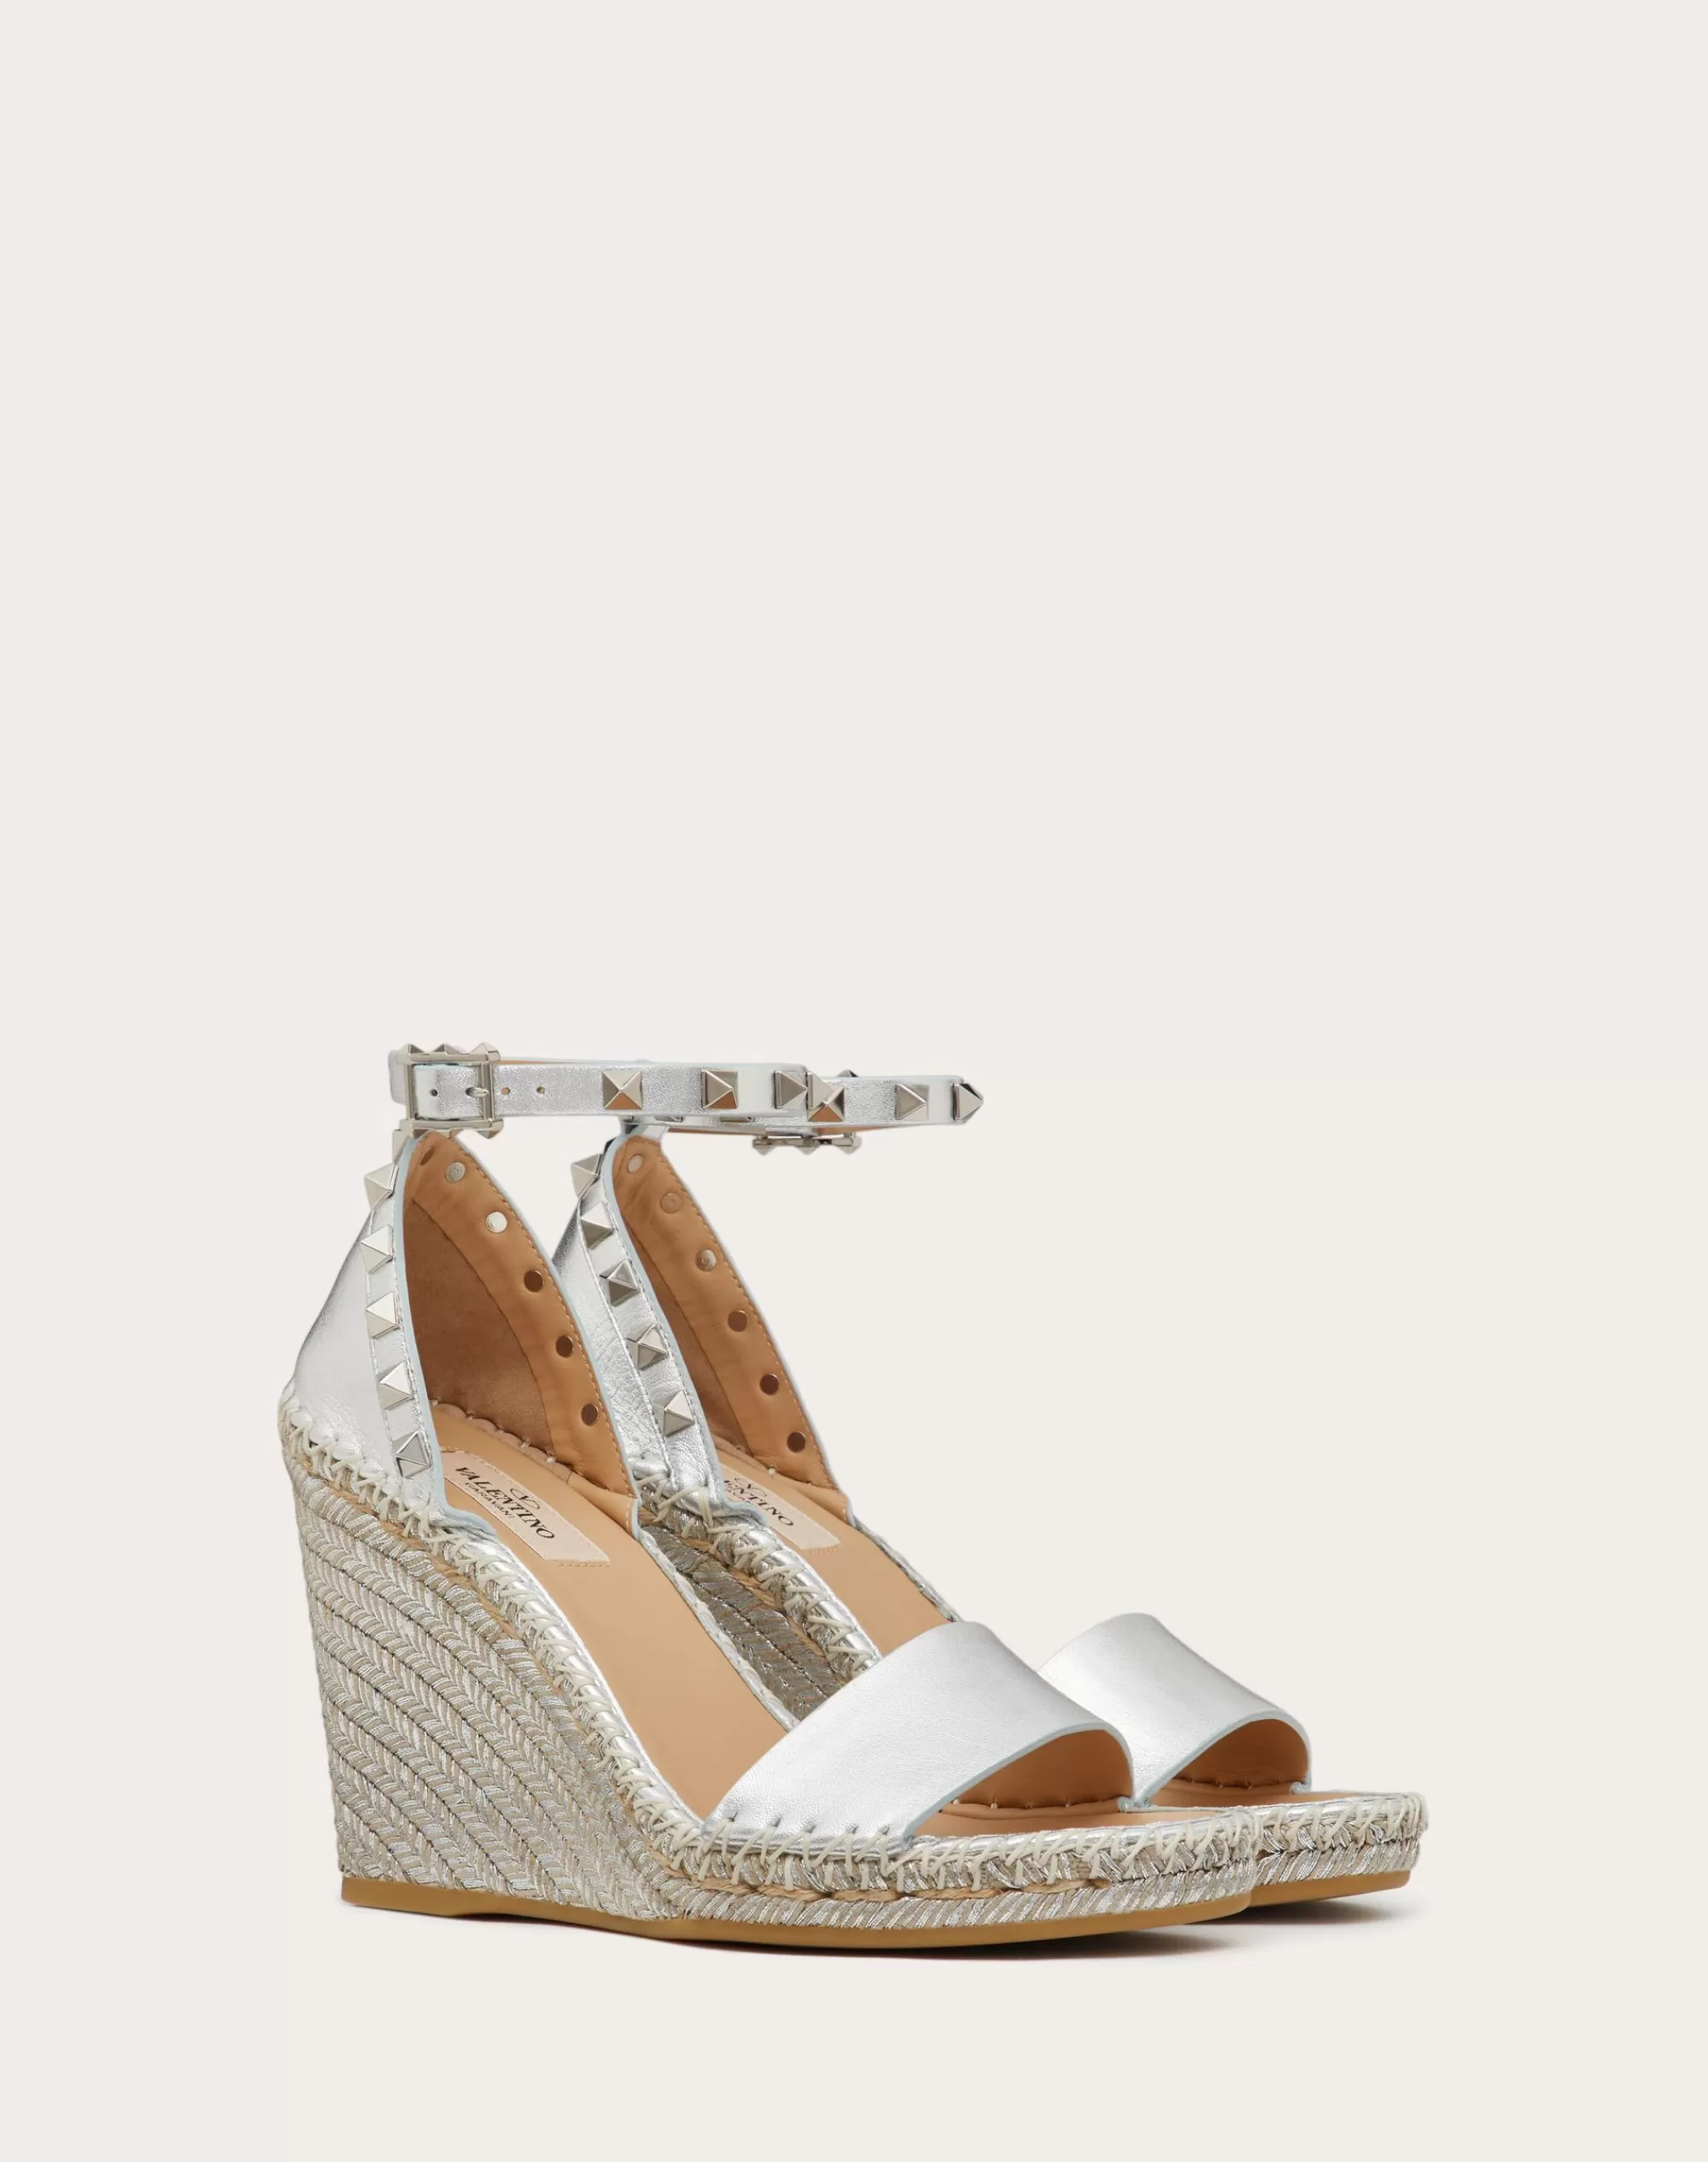 Valentino ROCKSTUD DOUBLE WEDGE SANDAL IN METALLIC NAPPA LEATHER 105 MM Silver Cheap